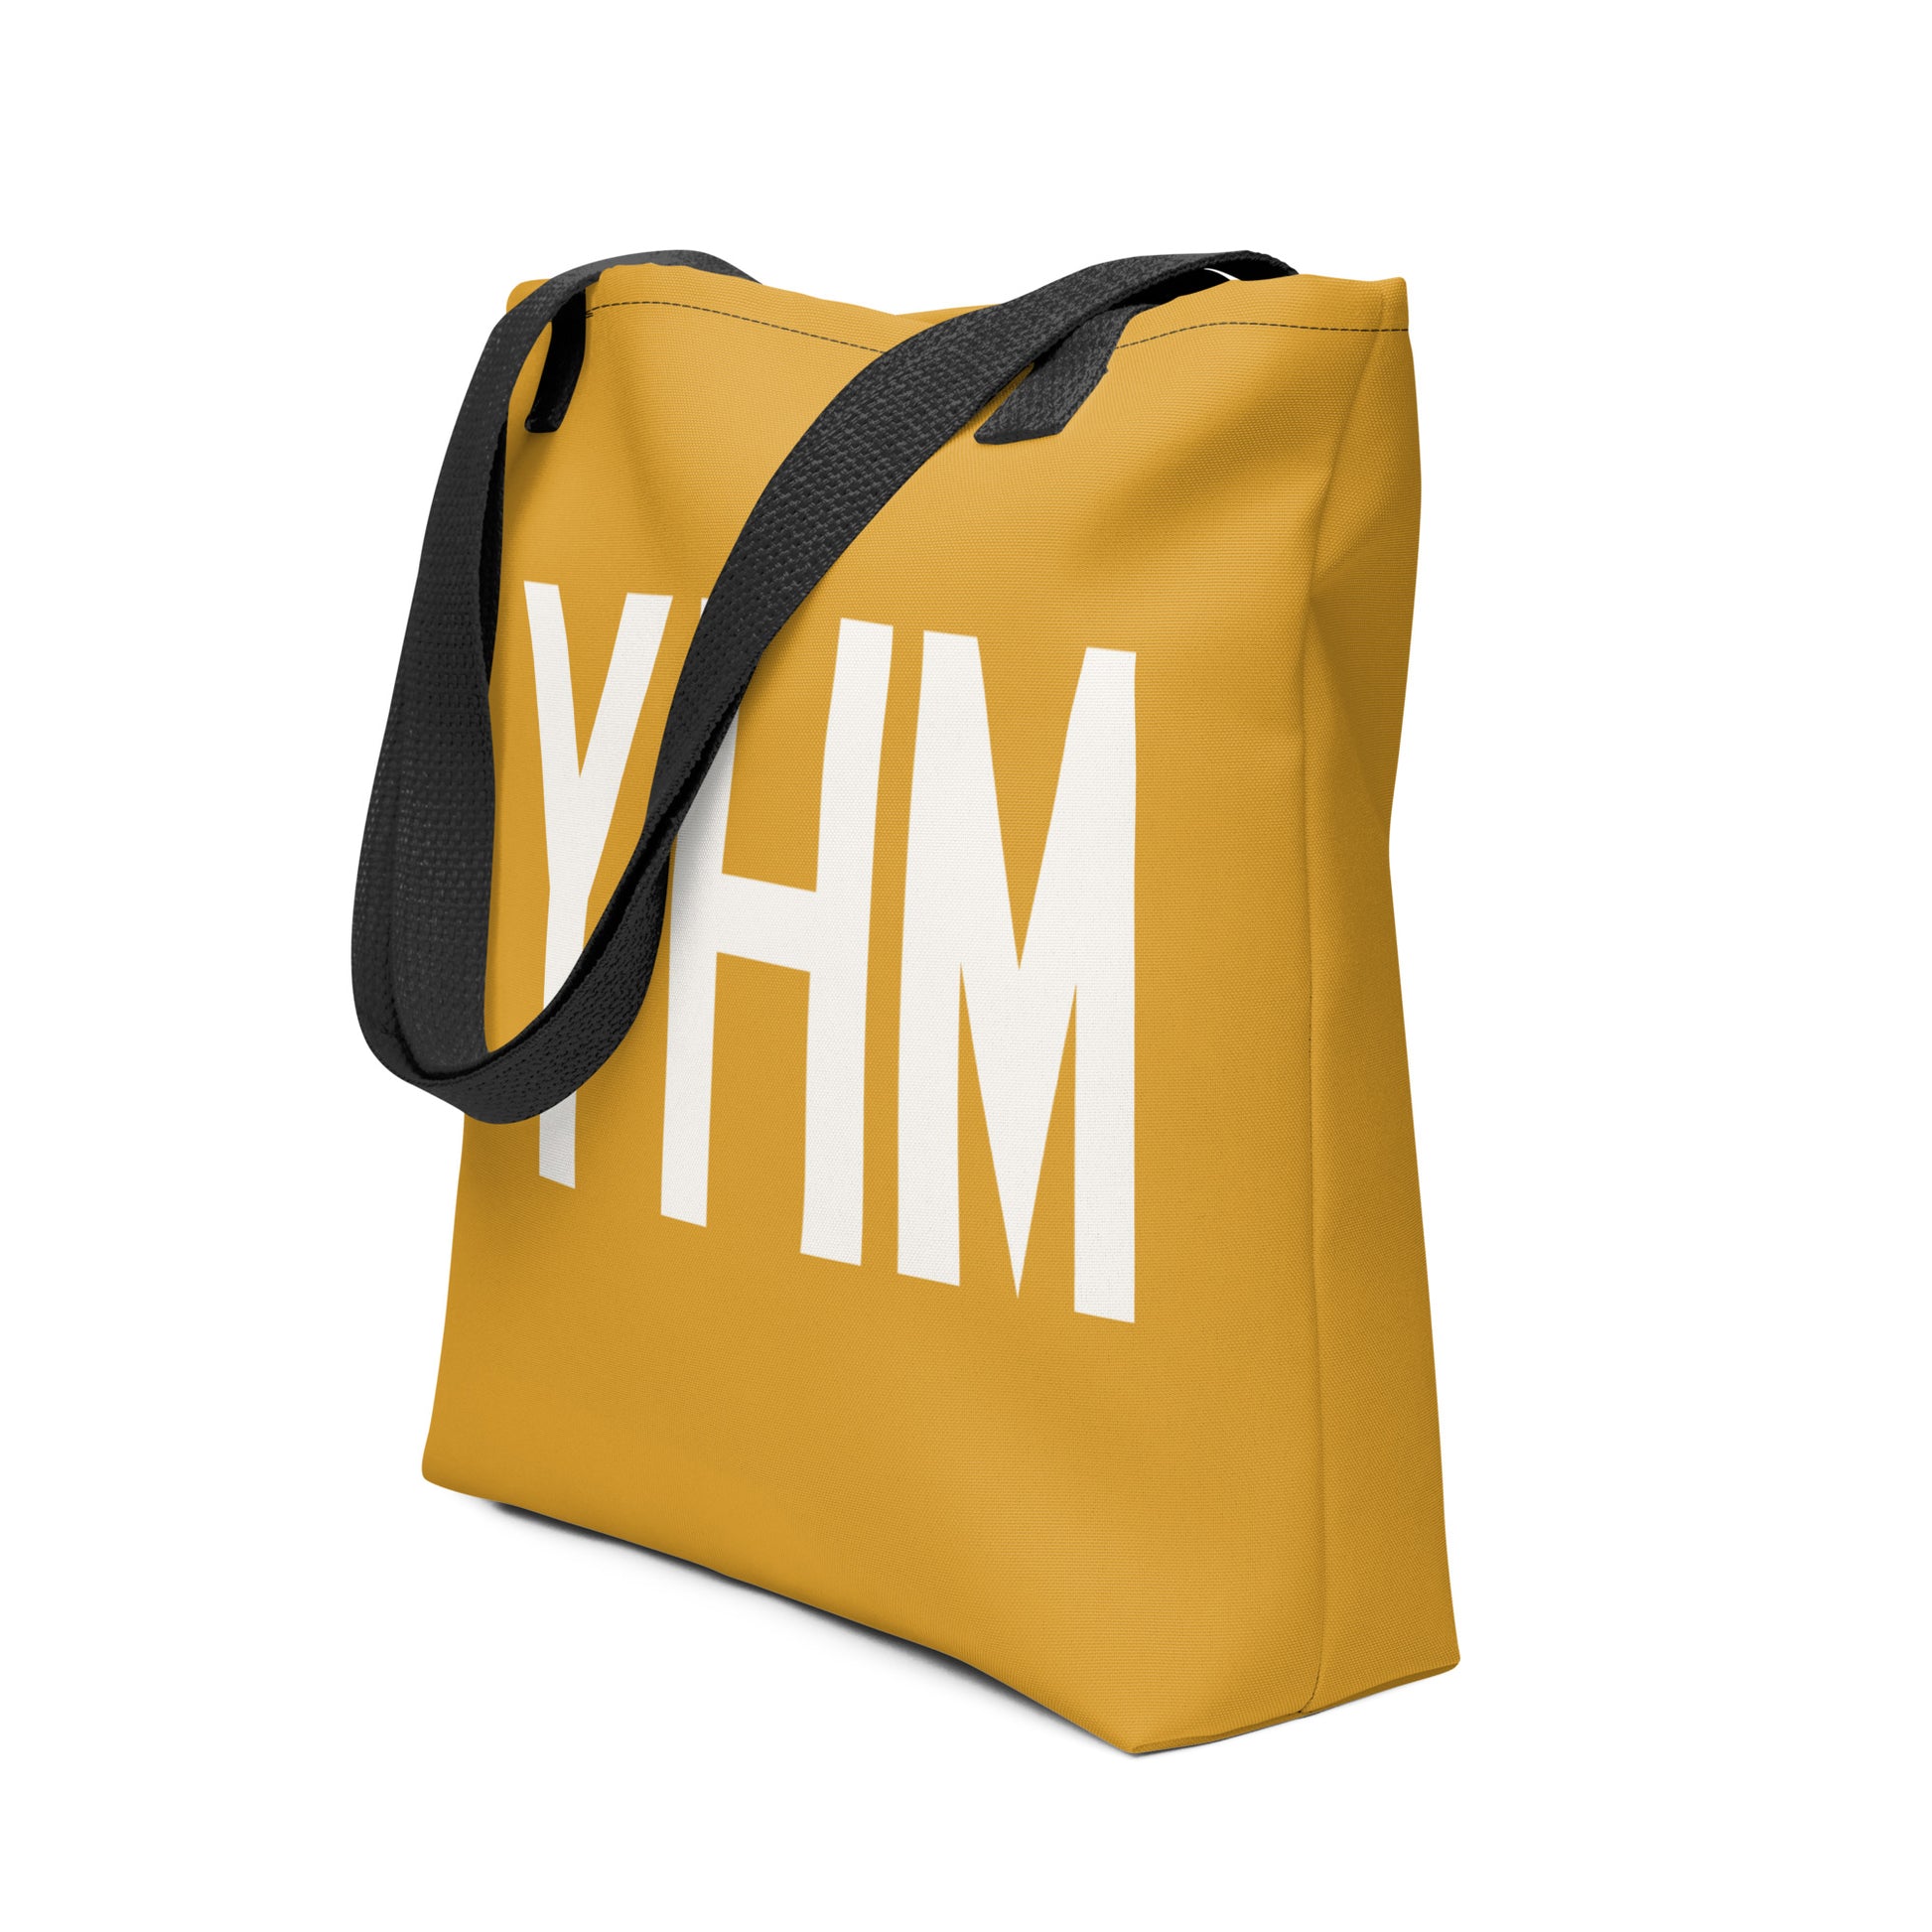 Aviation Gift Tote Bag - Buttercup • YHM Hamilton • YHM Designs - Image 05